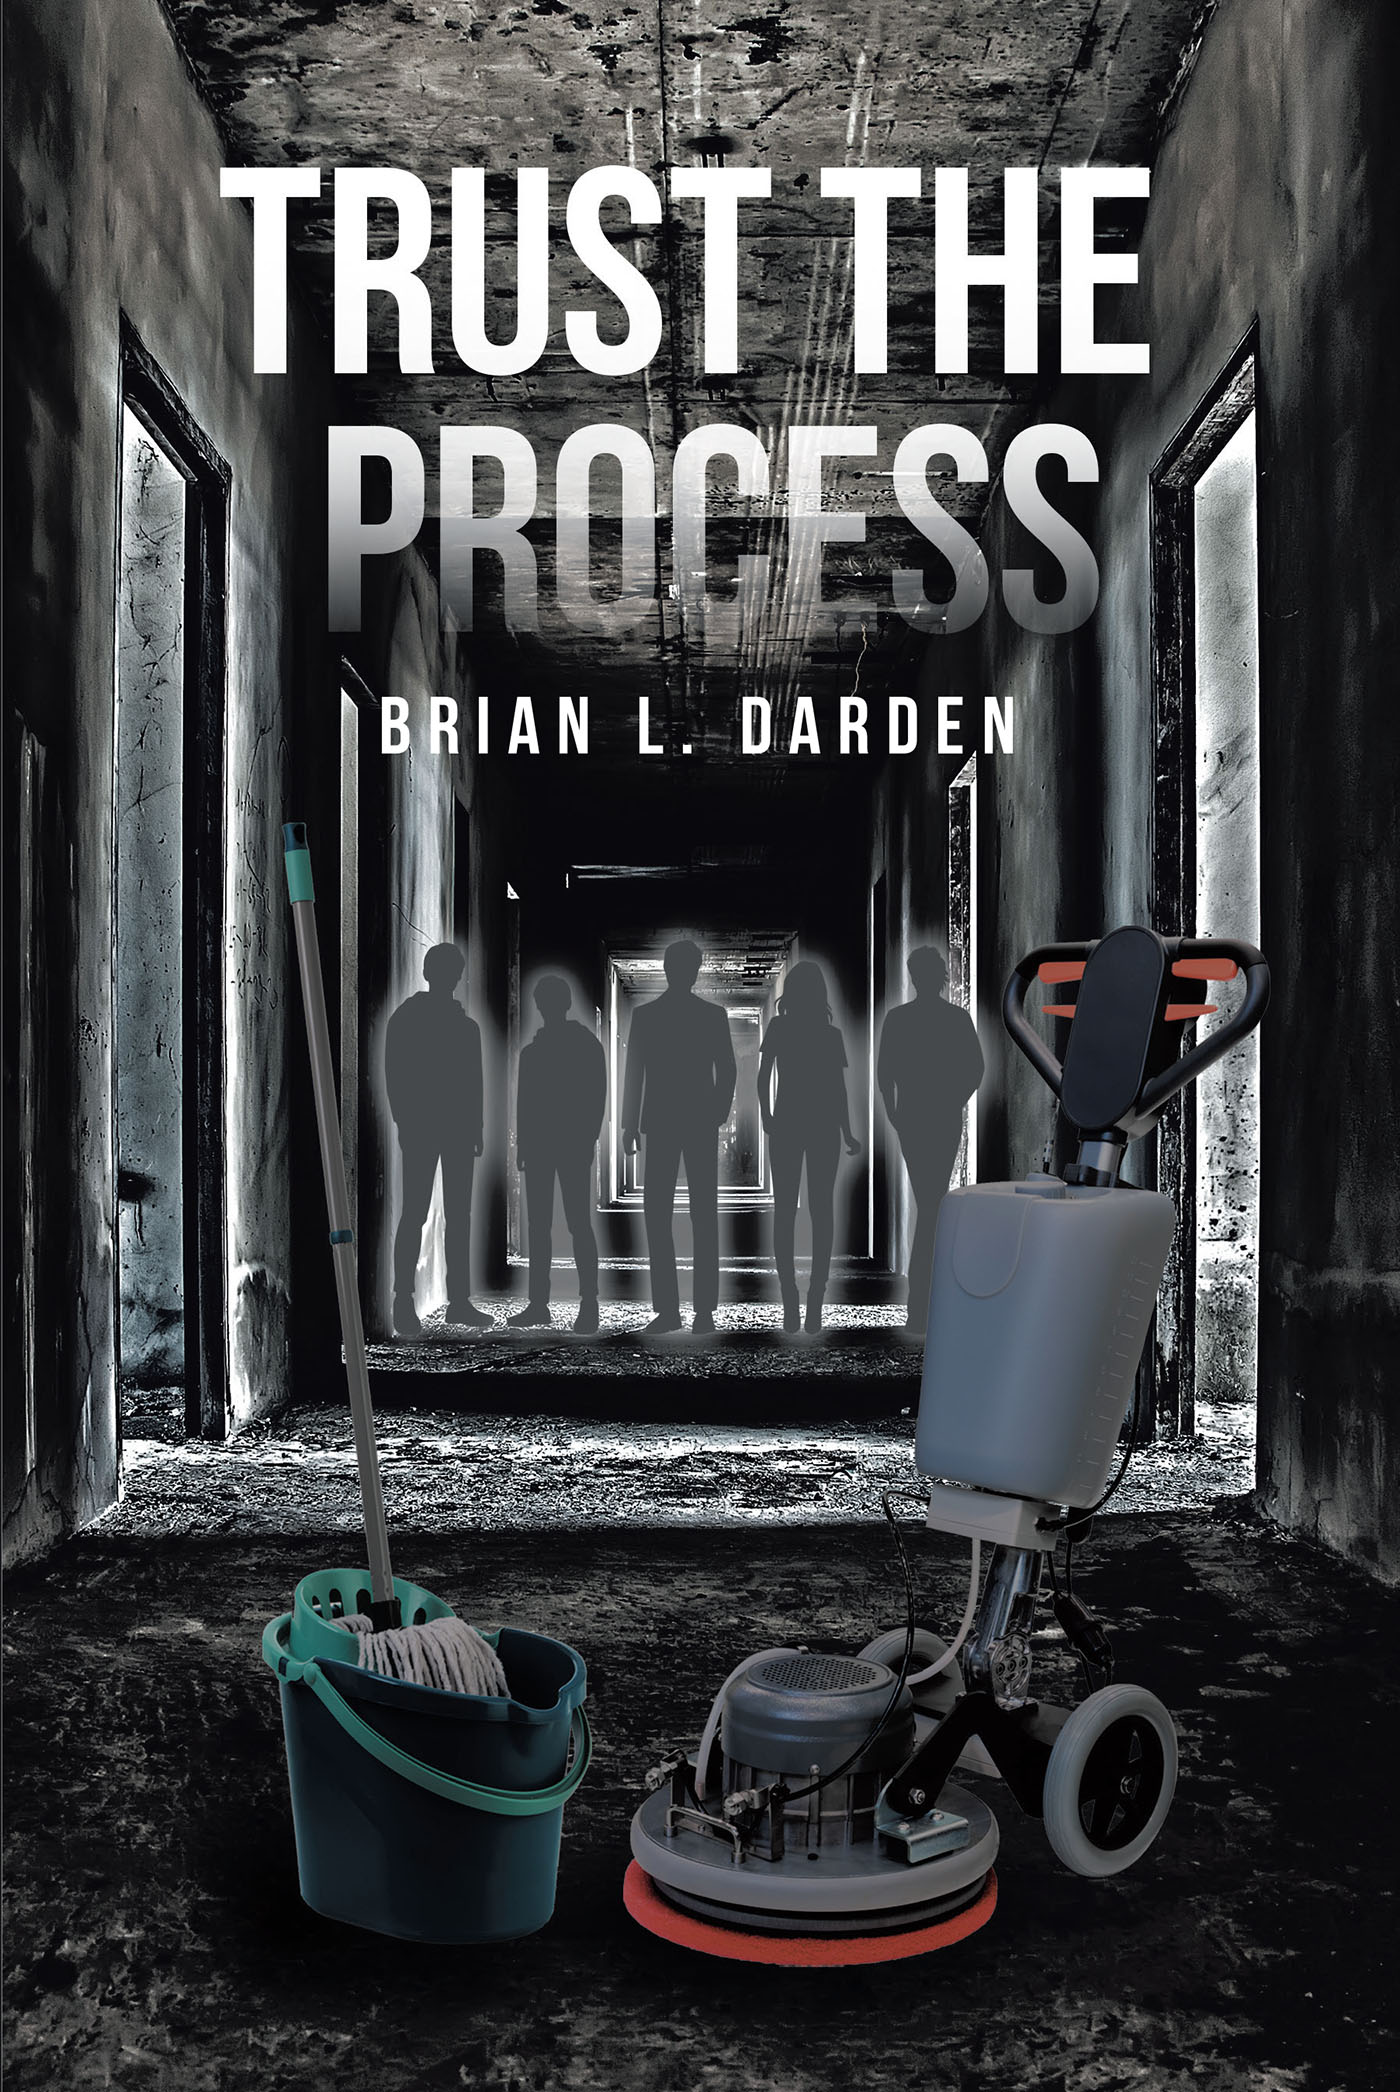 Brian L. Darden’s Newly Released "Trust the Process" is a Compassionate Discussion of the Challenges That Attempt to Push Us from God